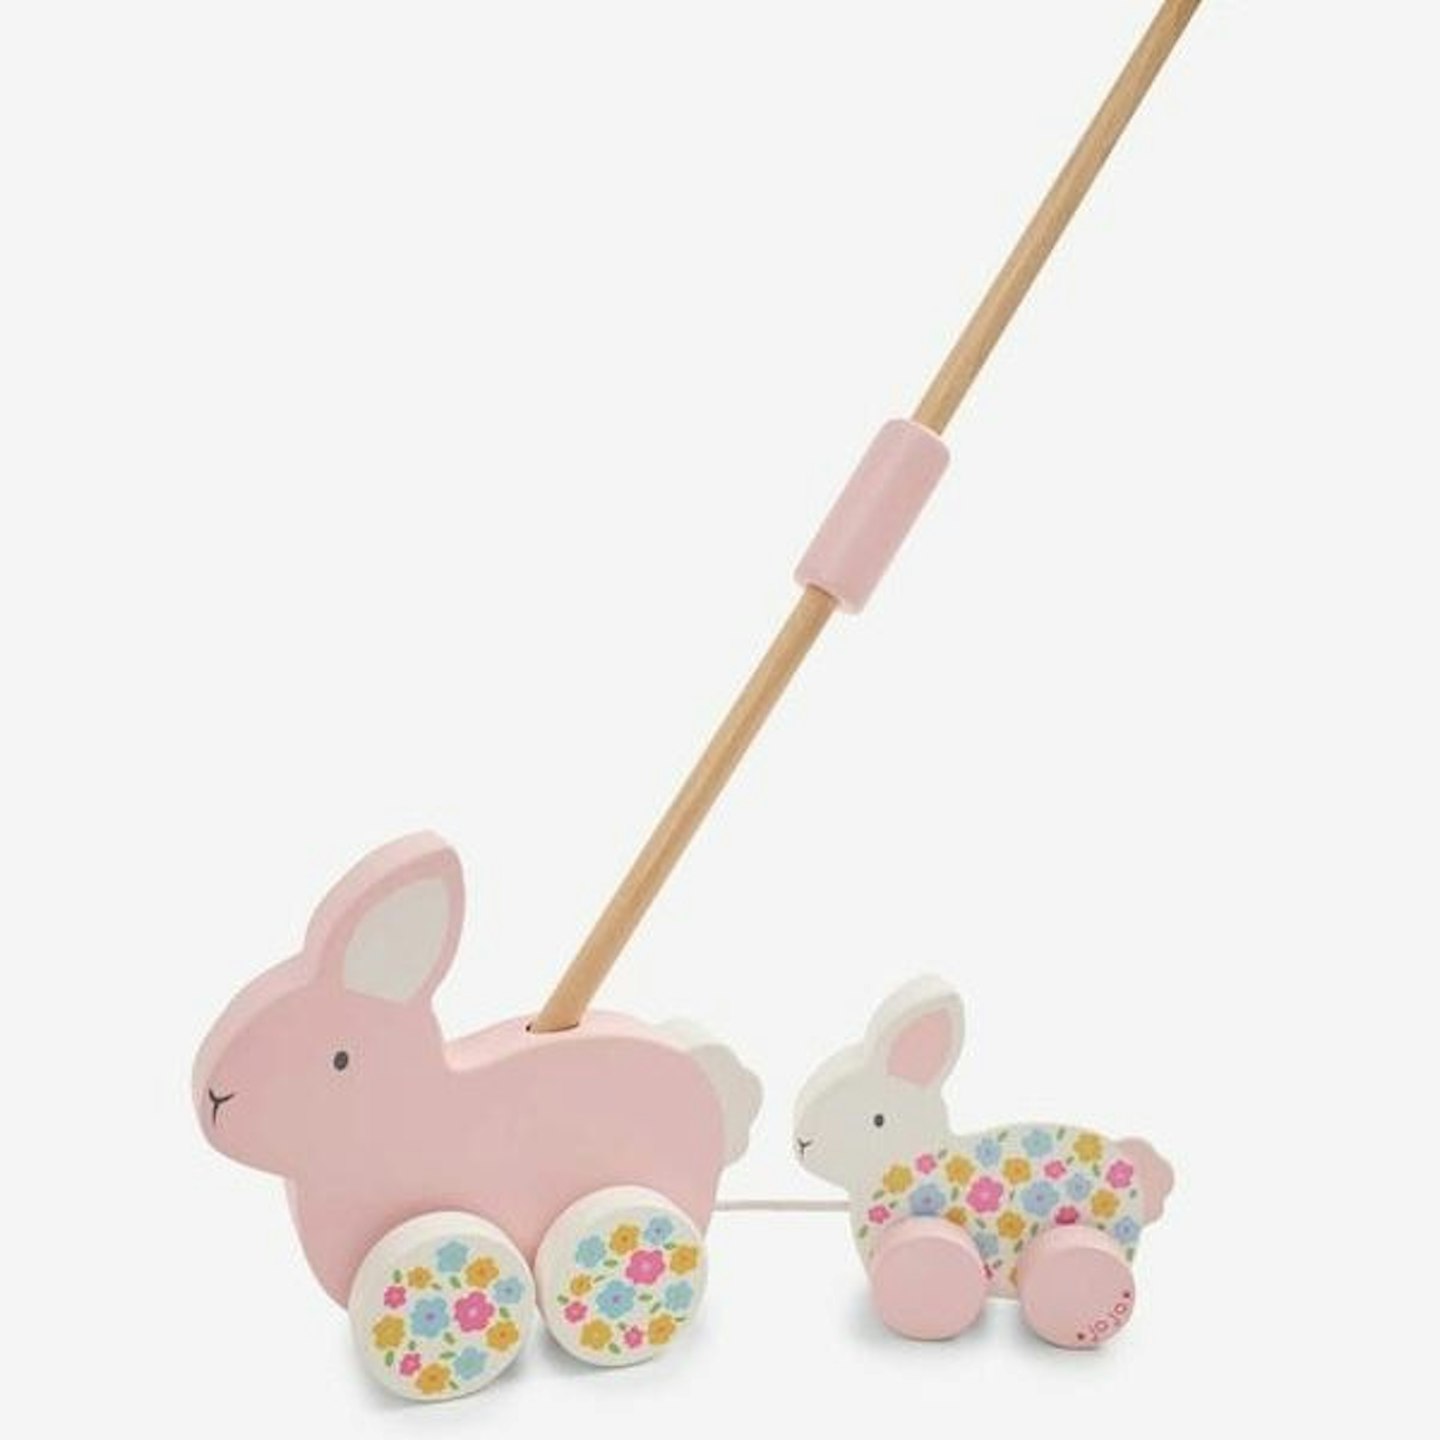 Bunny Push-Along Toy With Handle